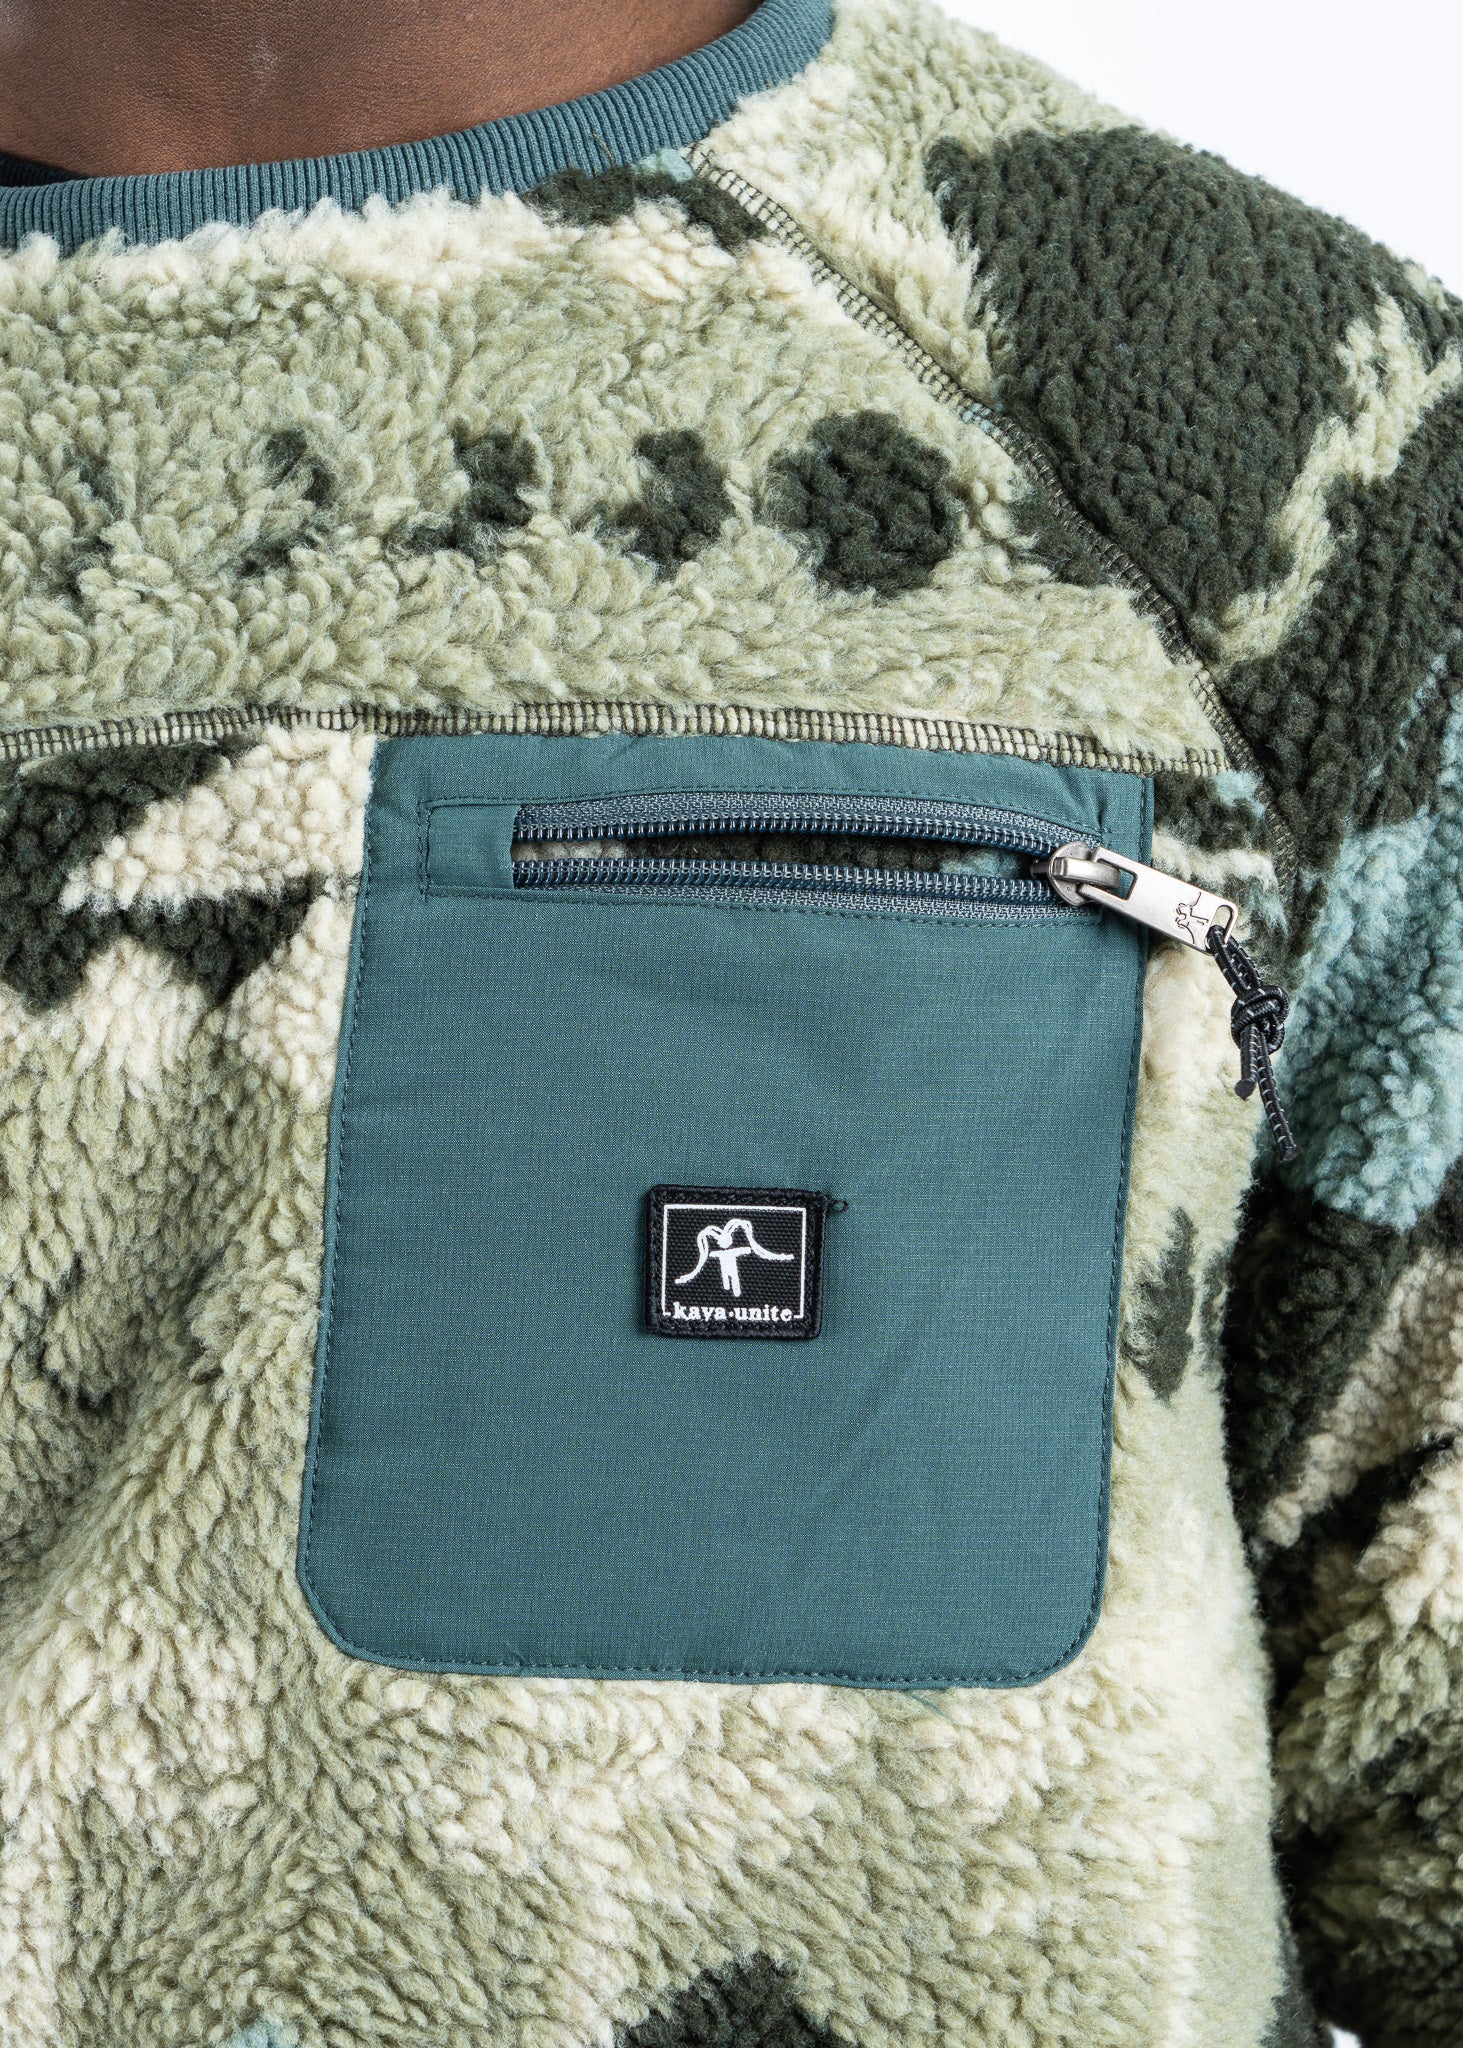 Sherpa Crew Andes Green